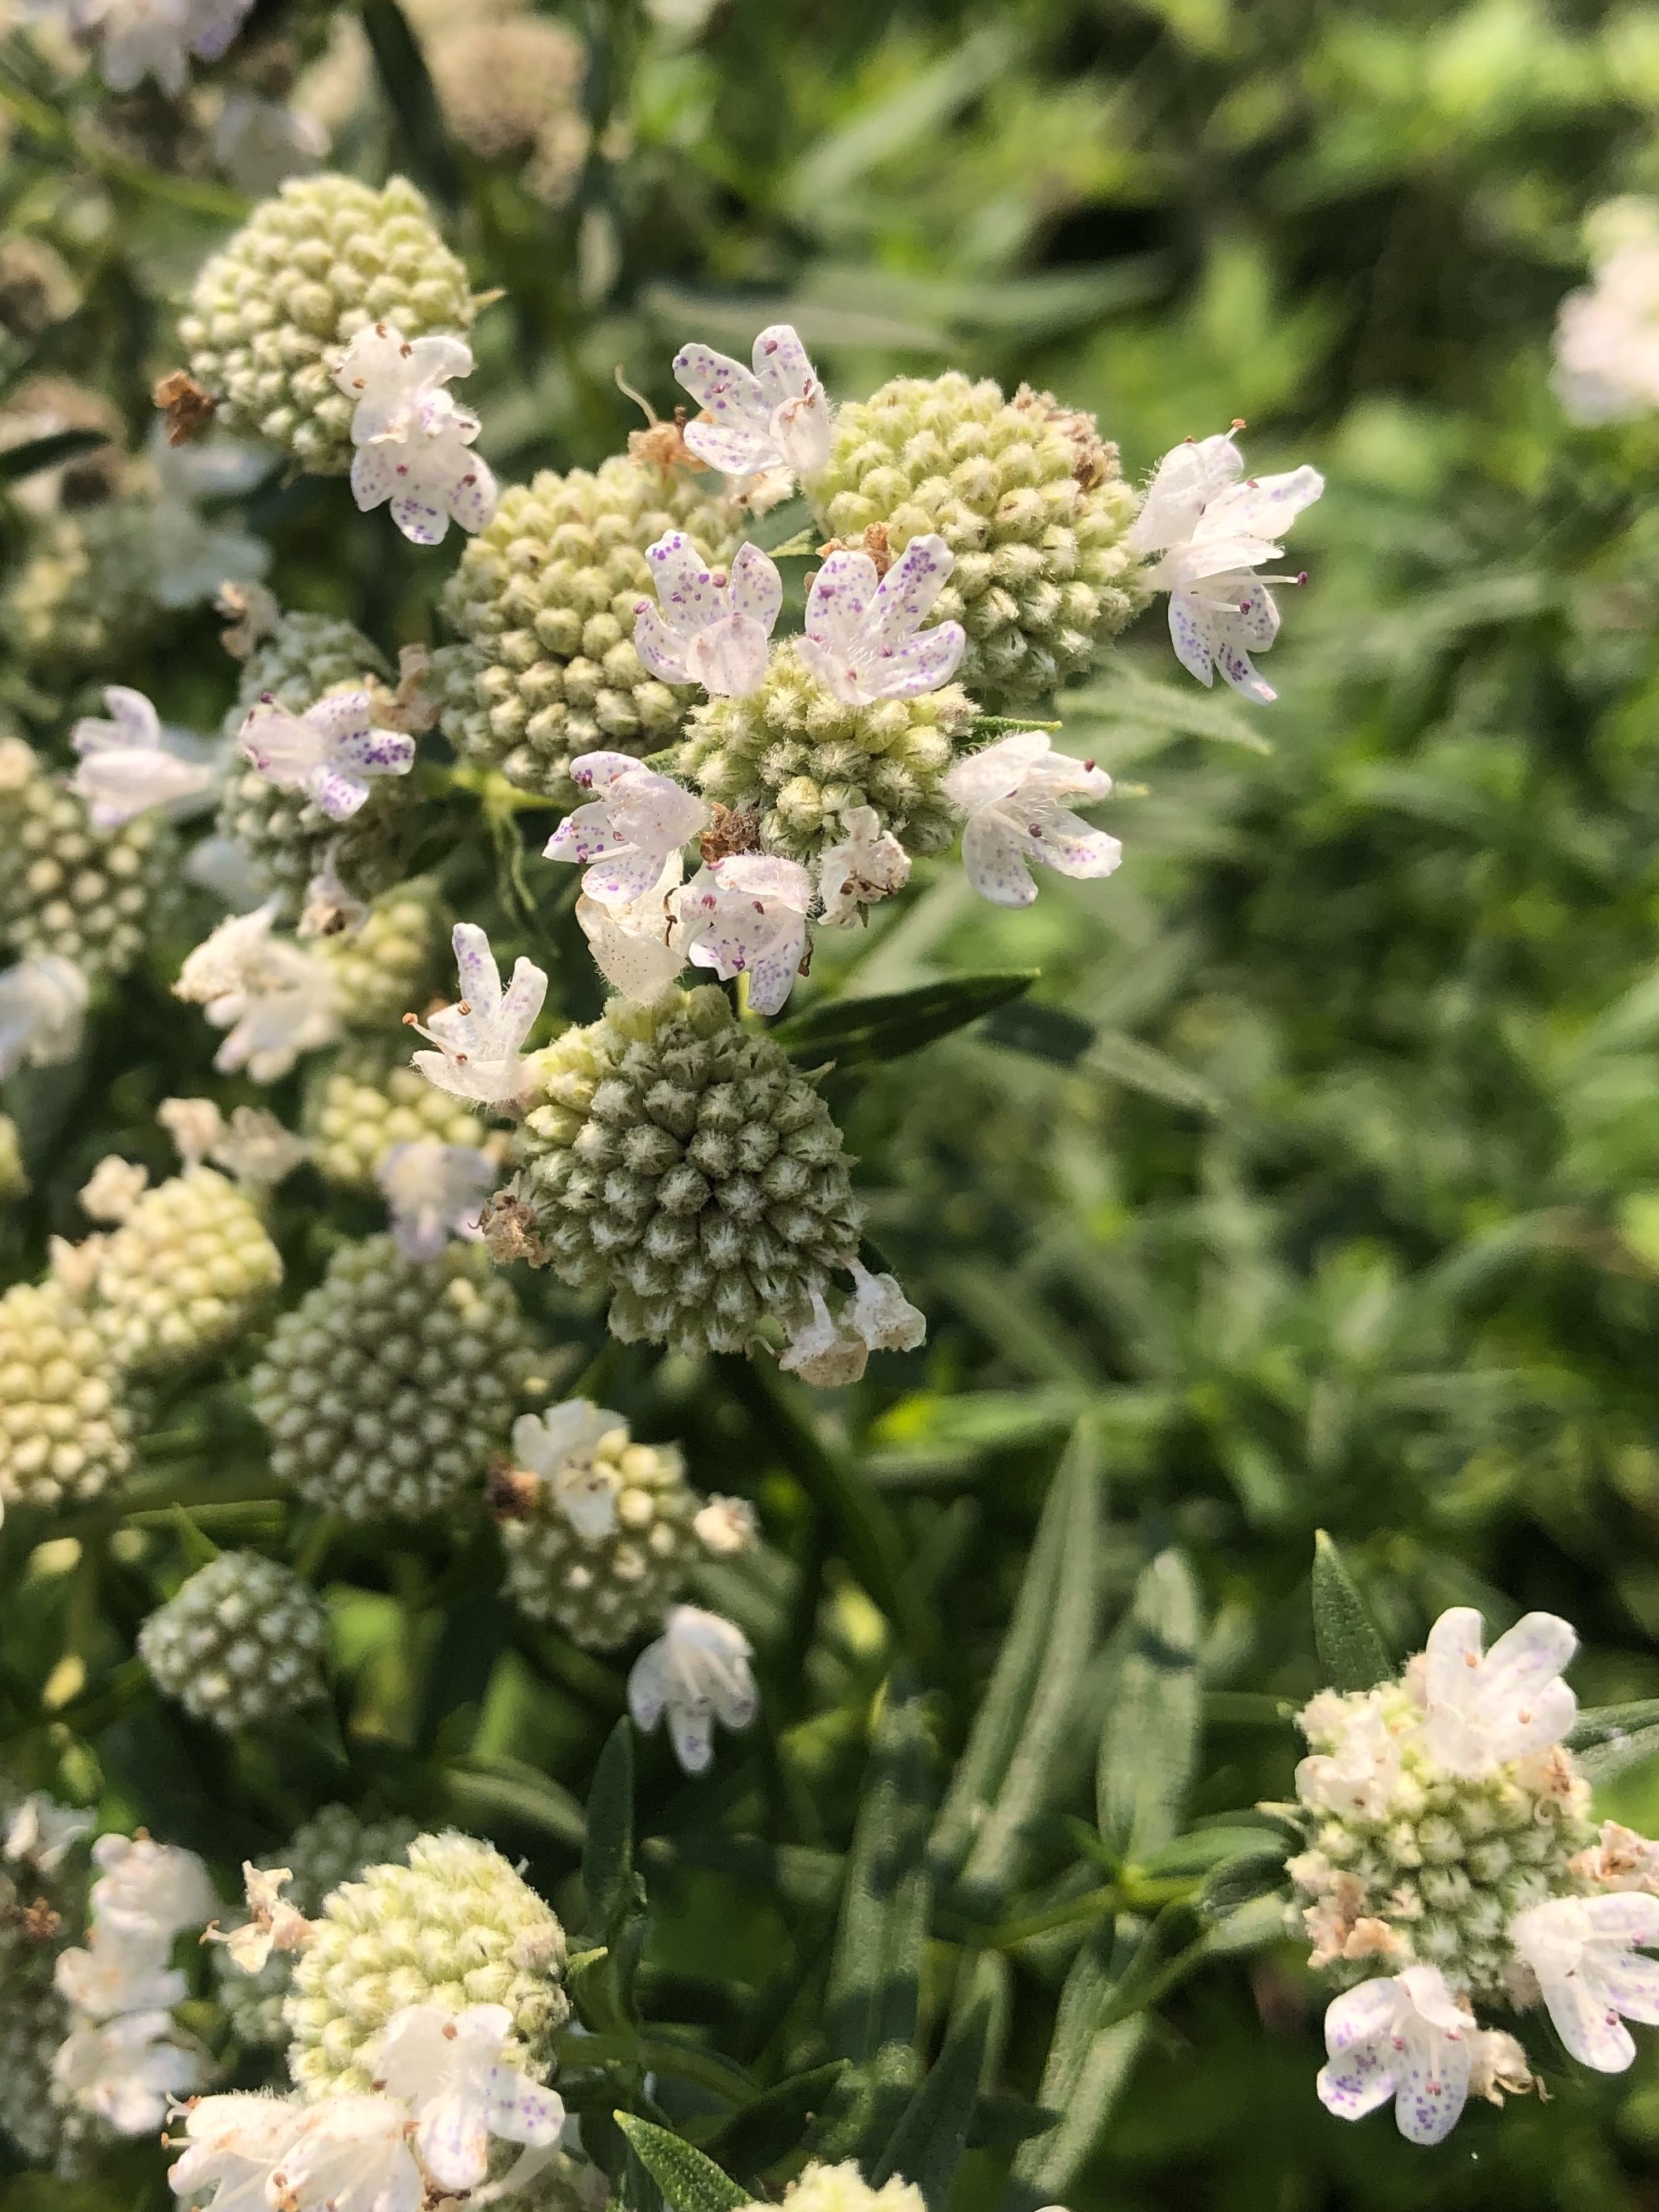 Common Mountain Mint off of Woodrow Street in Madison, Wisconsin on August 1, 2021.